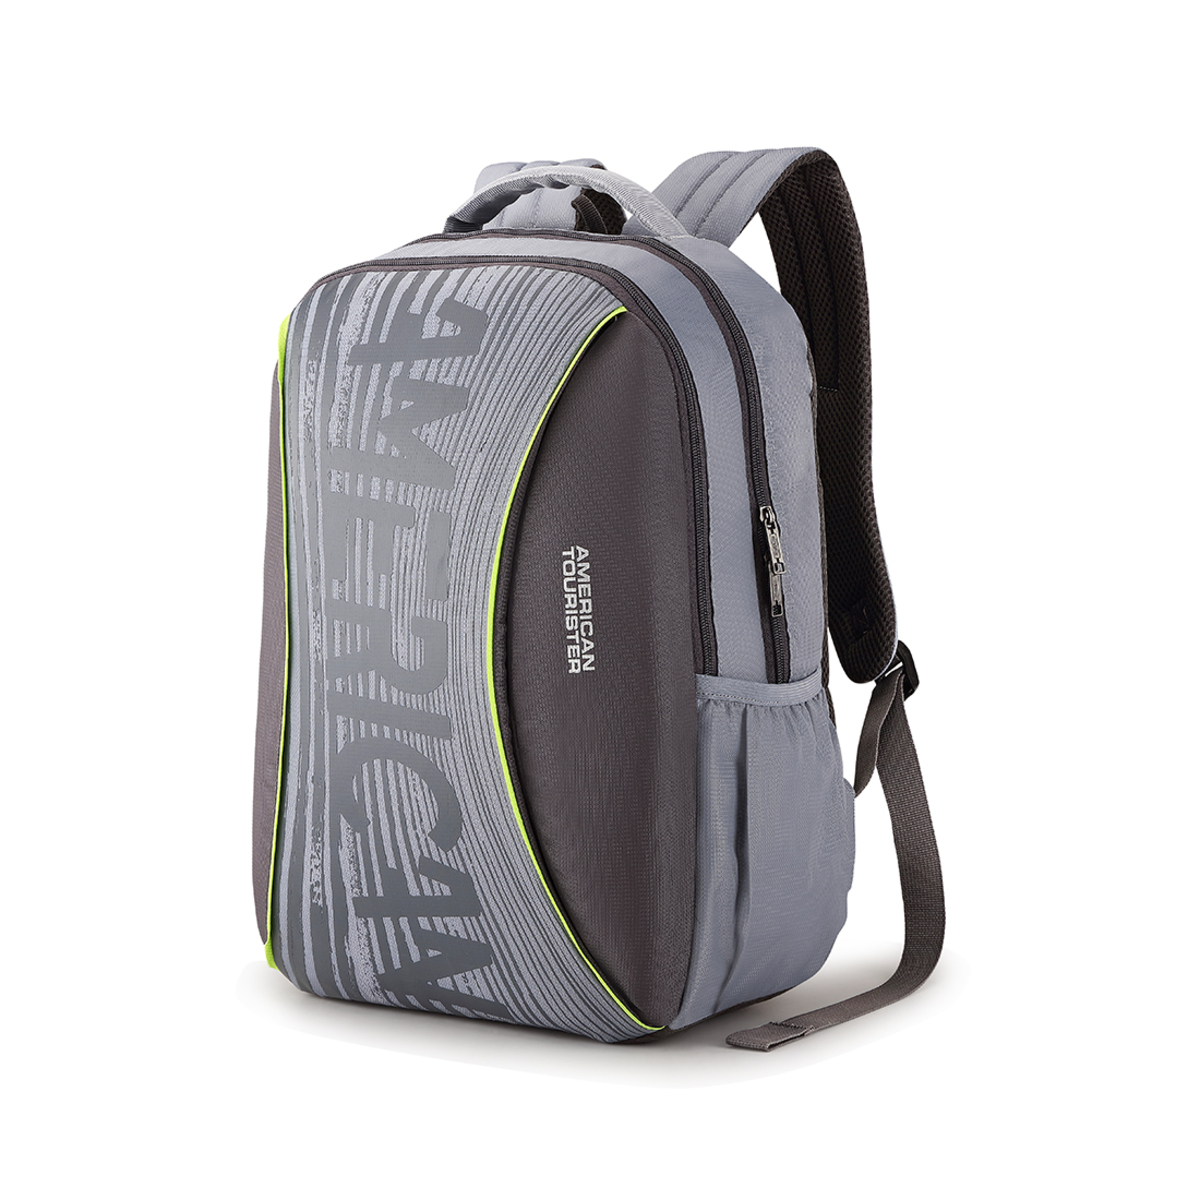 American Tourister Back Pack Twing 02 Grey